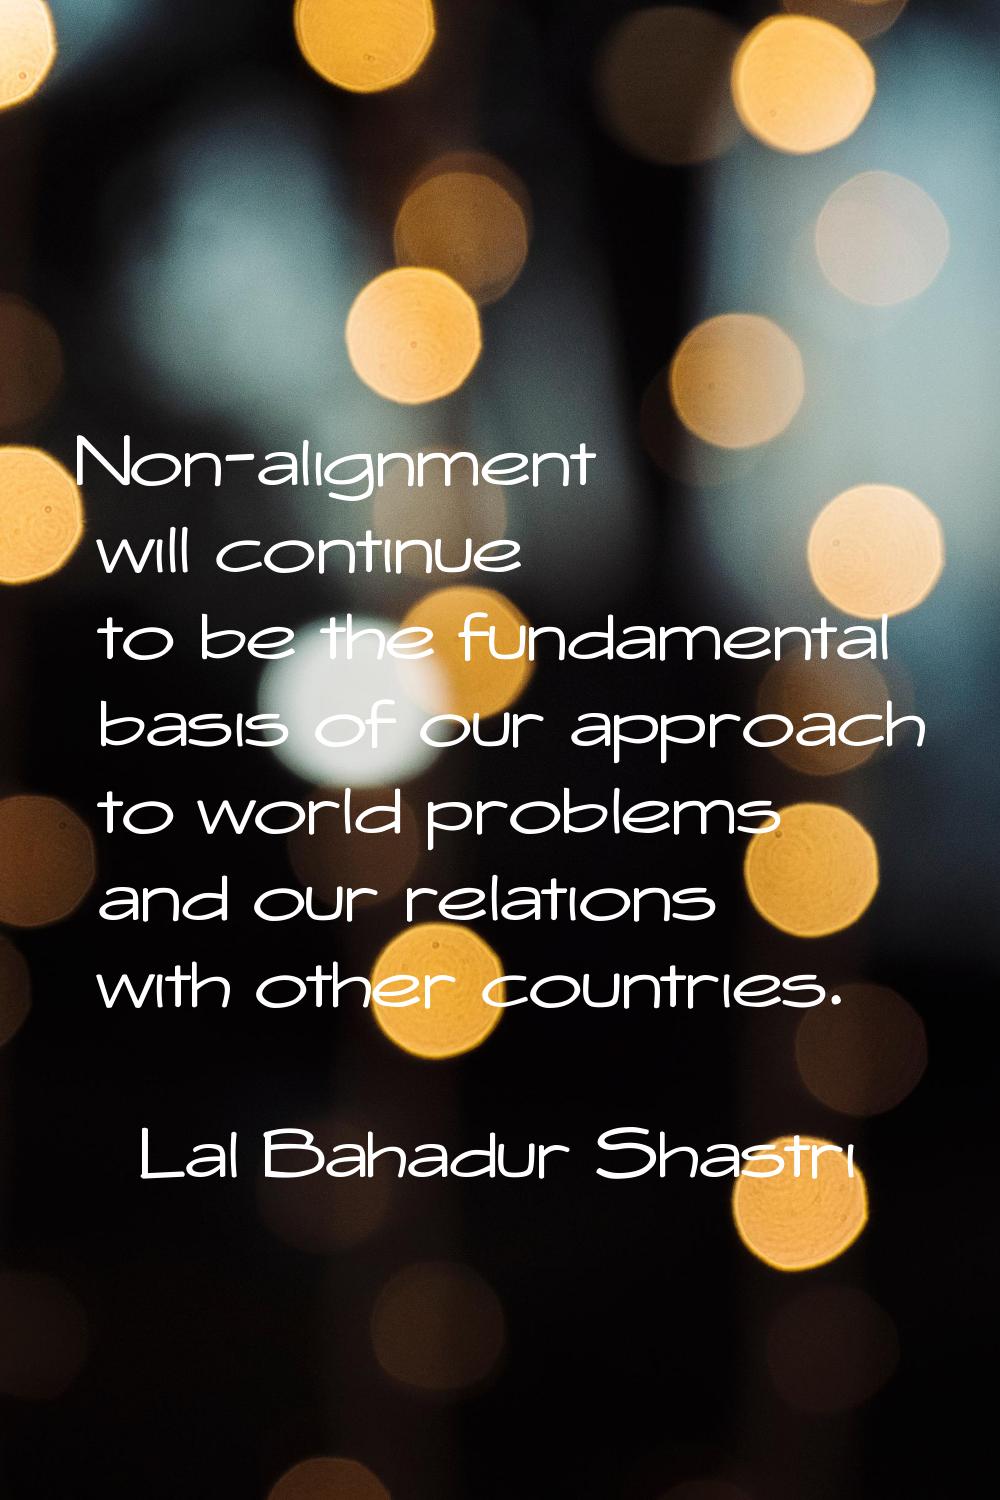 Non-alignment will continue to be the fundamental basis of our approach to world problems and our r